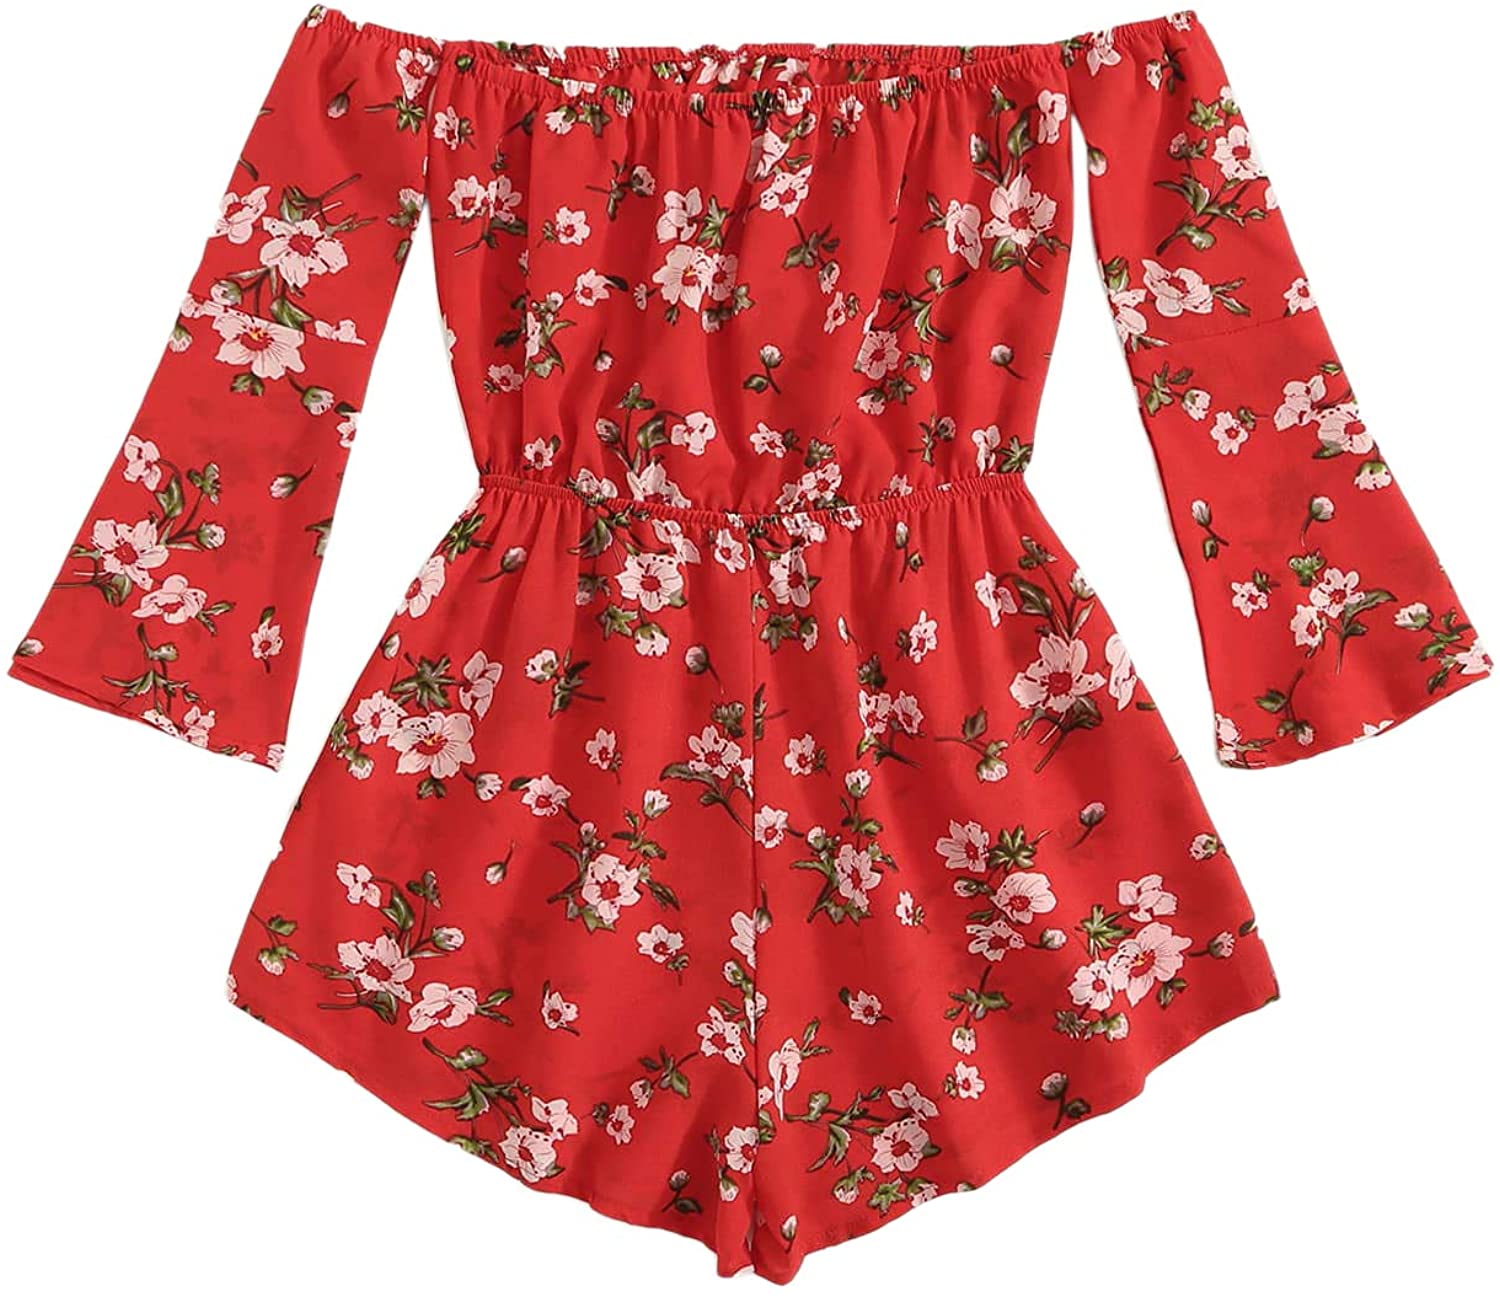 MAKEMECHIC Womens Casual Floral Print One Piece Knot Front Off Shoulder Romper Playsuit